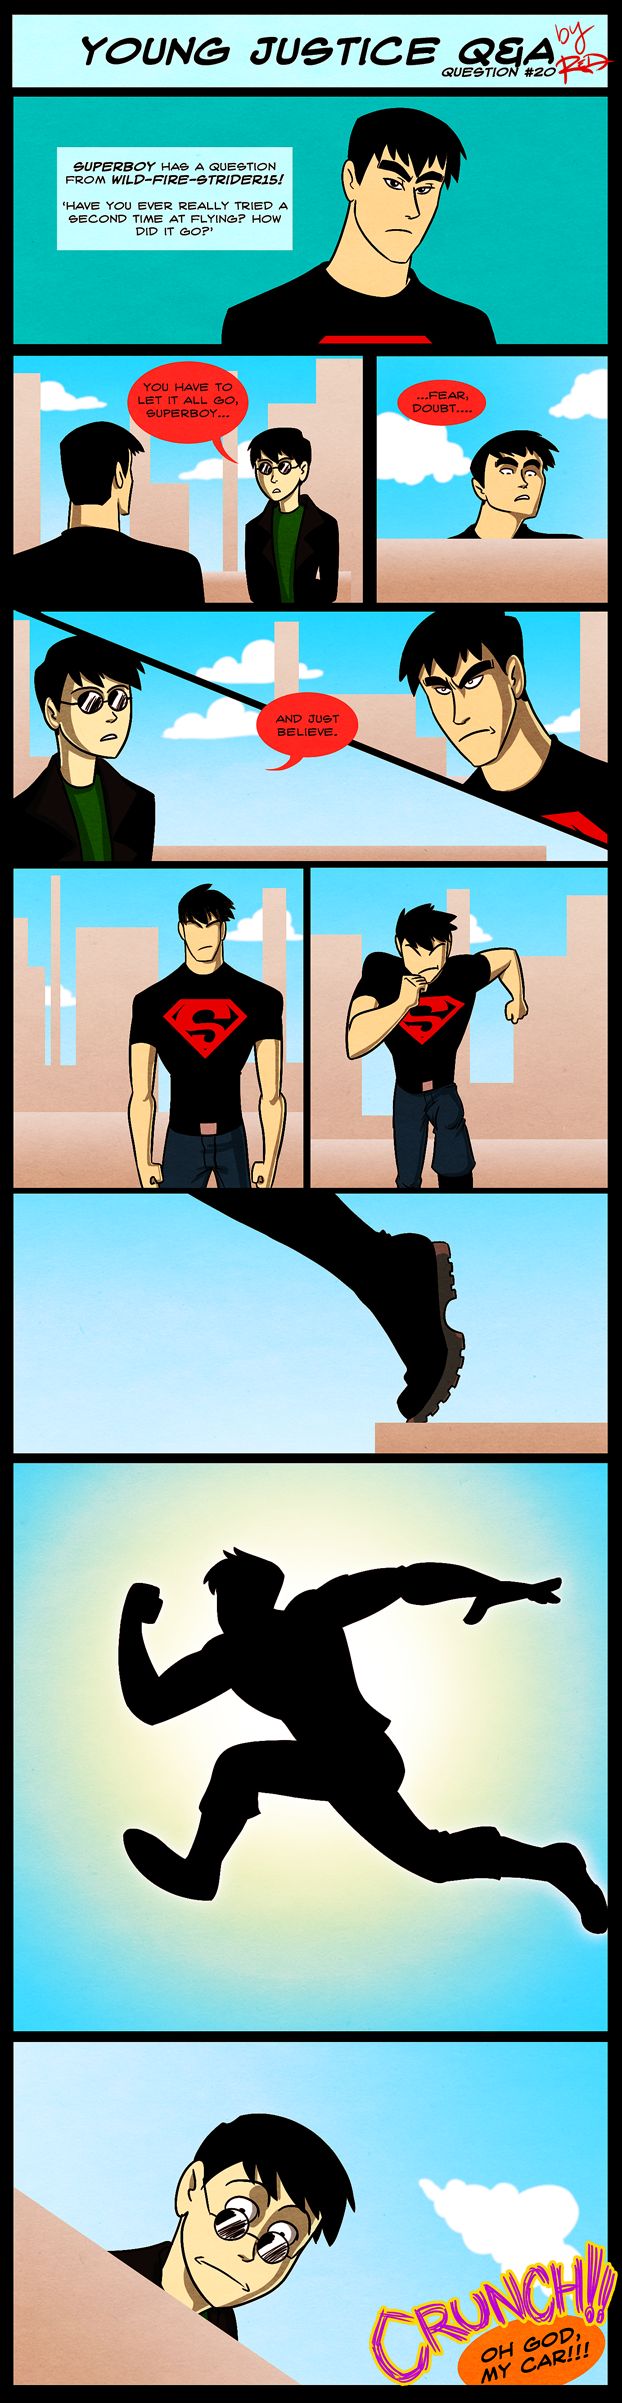 dan monica recommends nightwing young justice fanfiction pic